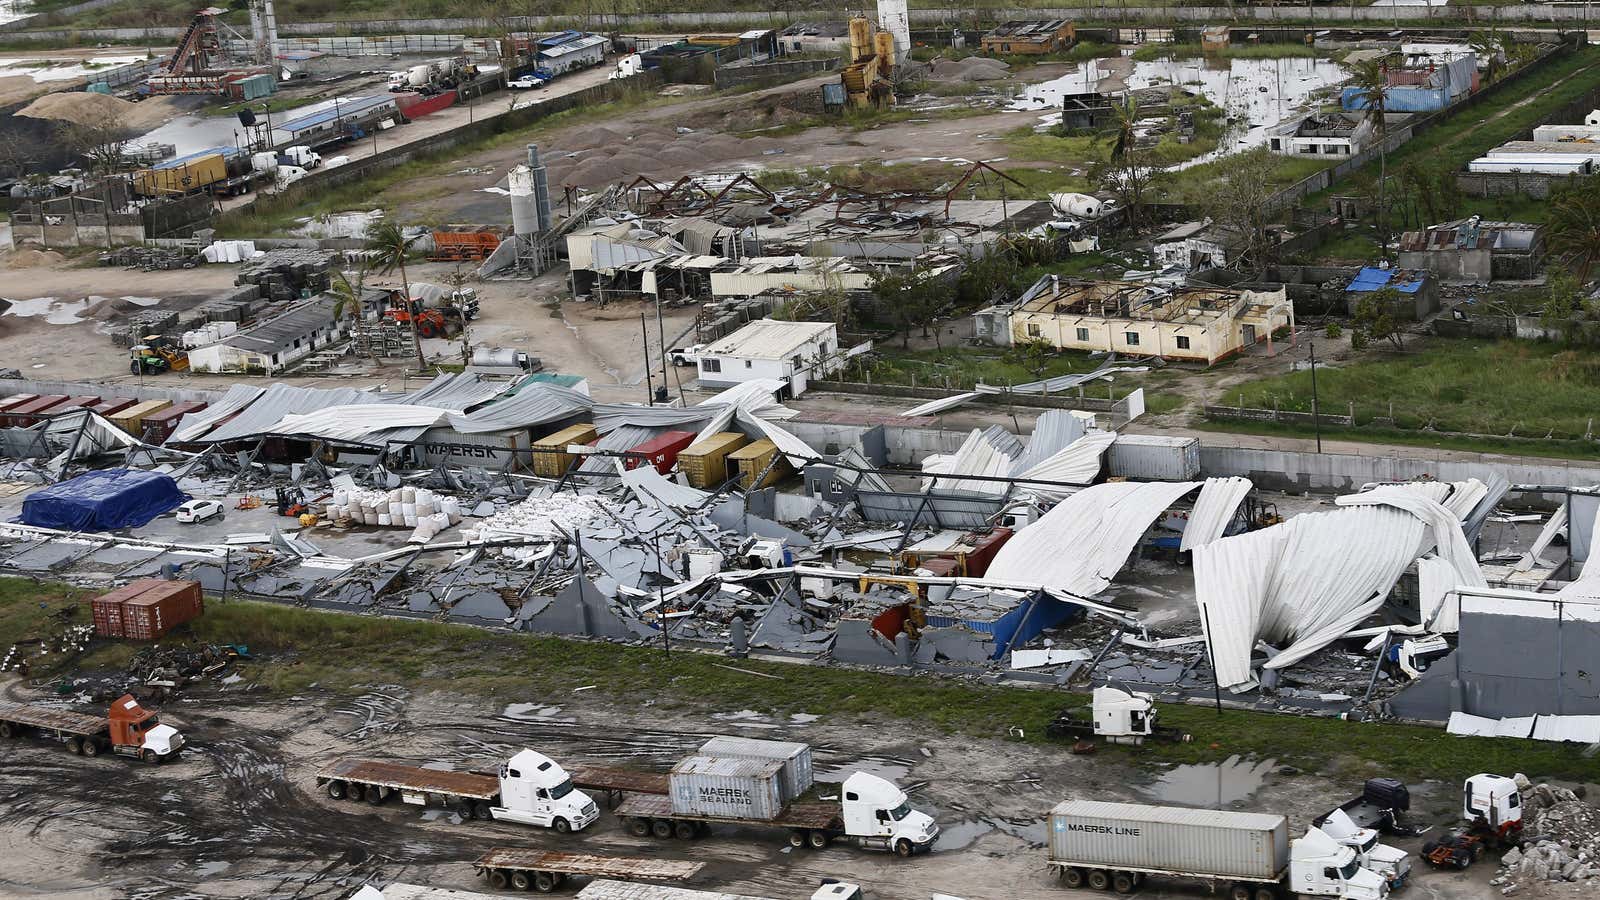 An aerial photo shows a damaged factory following the devastating Tropical Cyclone Idai in Beira, Mozambique, March 2019